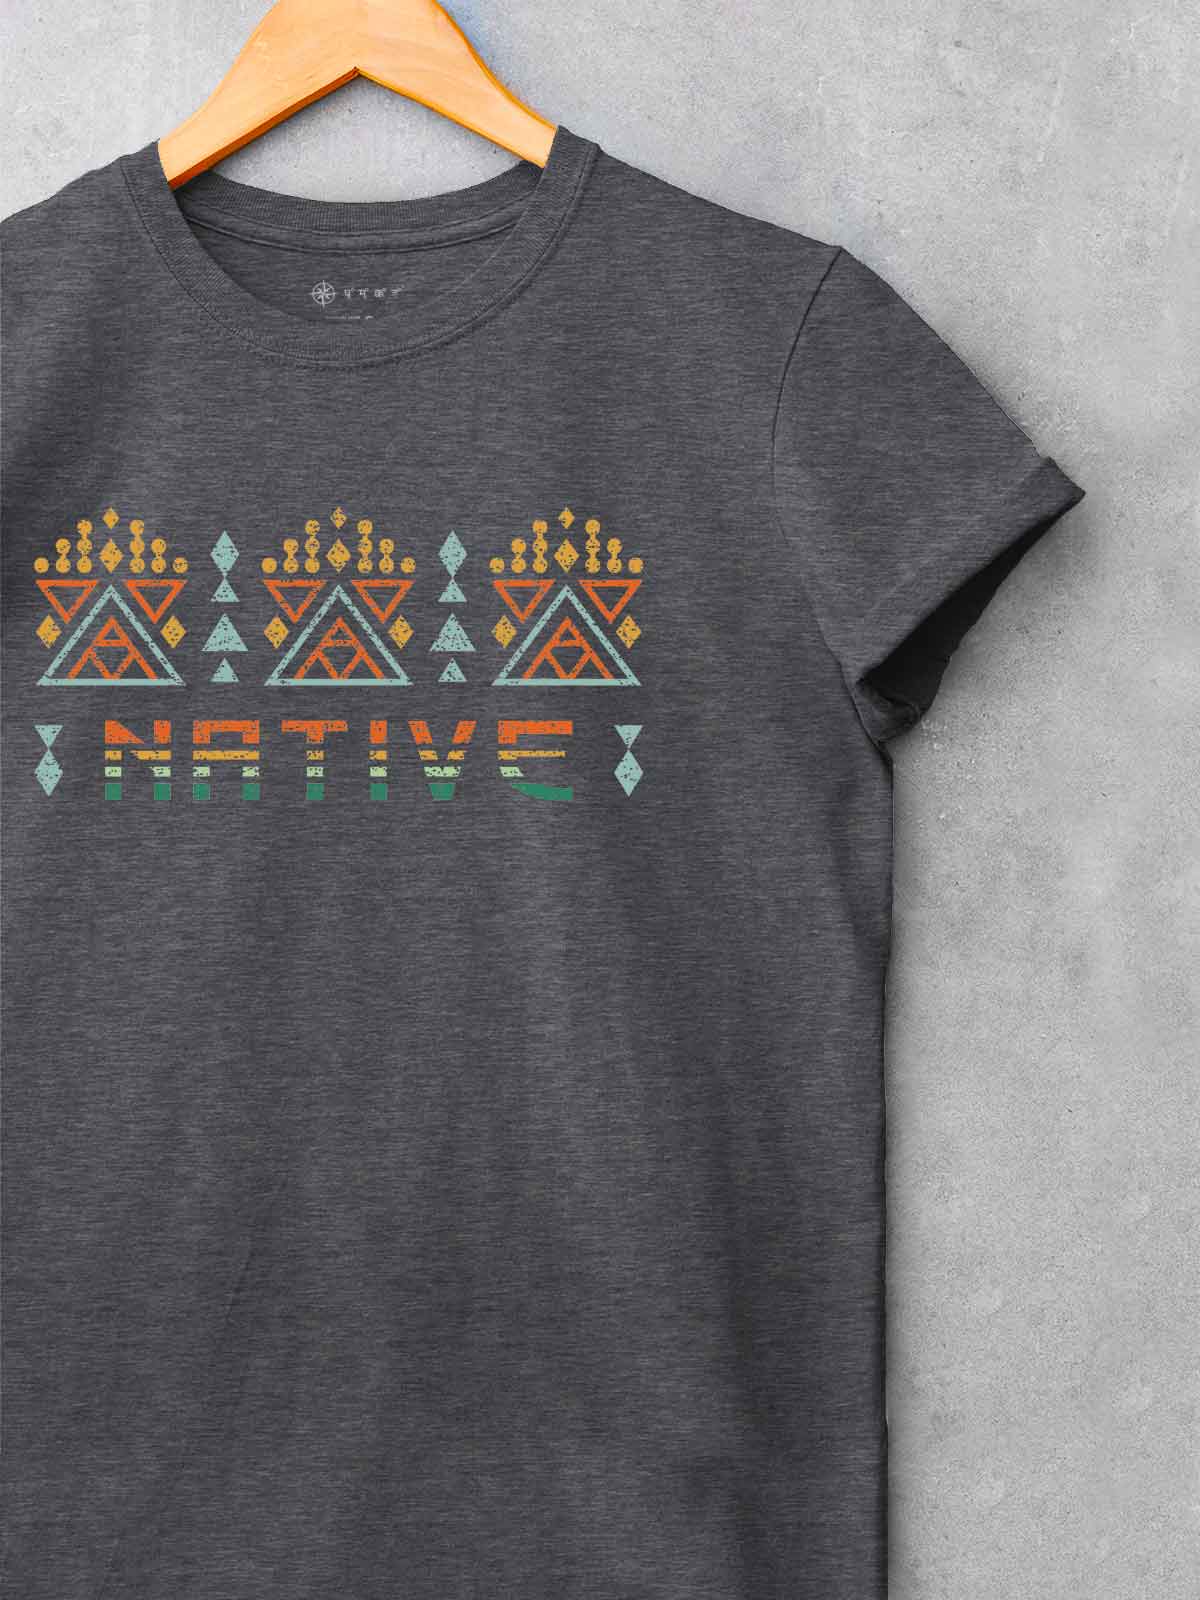 Proudly-native-printed-t-shirt-for-men by Ghumakkad